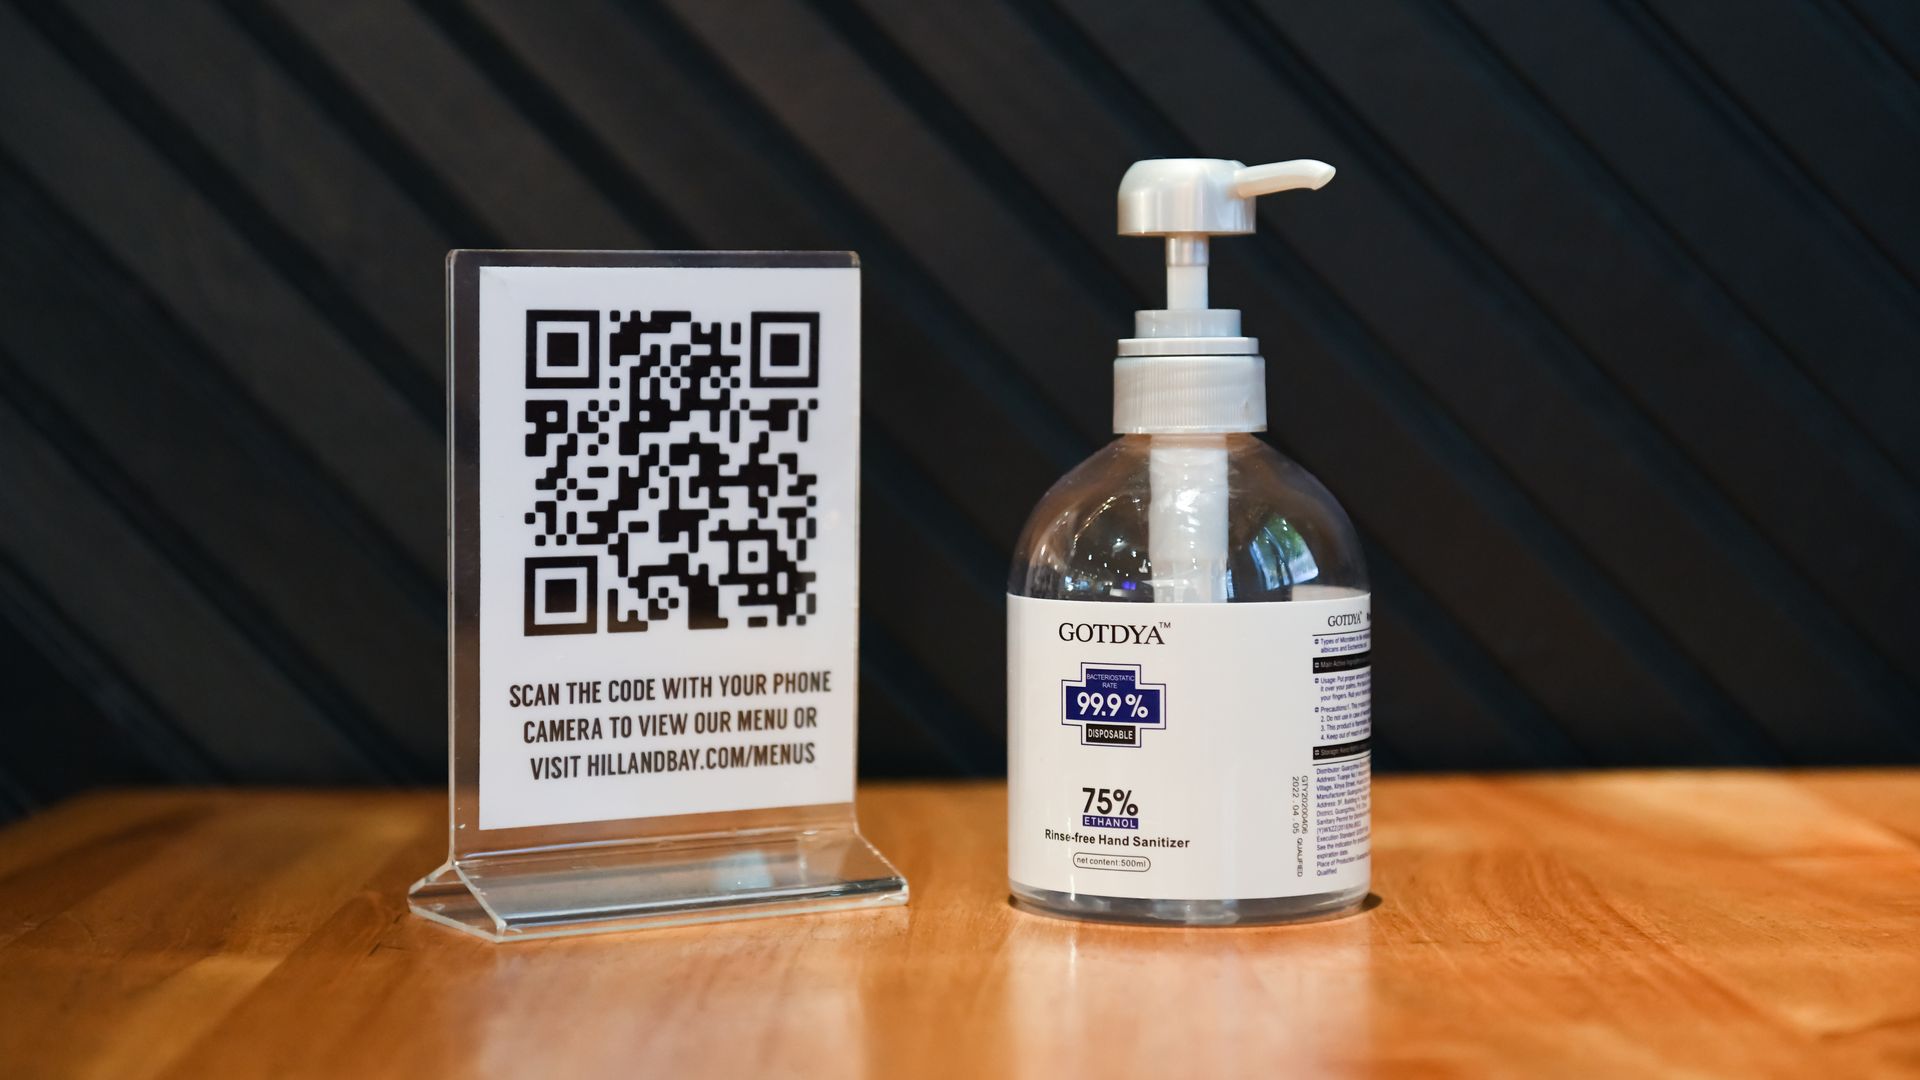 QR code for menus on display, next to bottle of hand sanitizer 